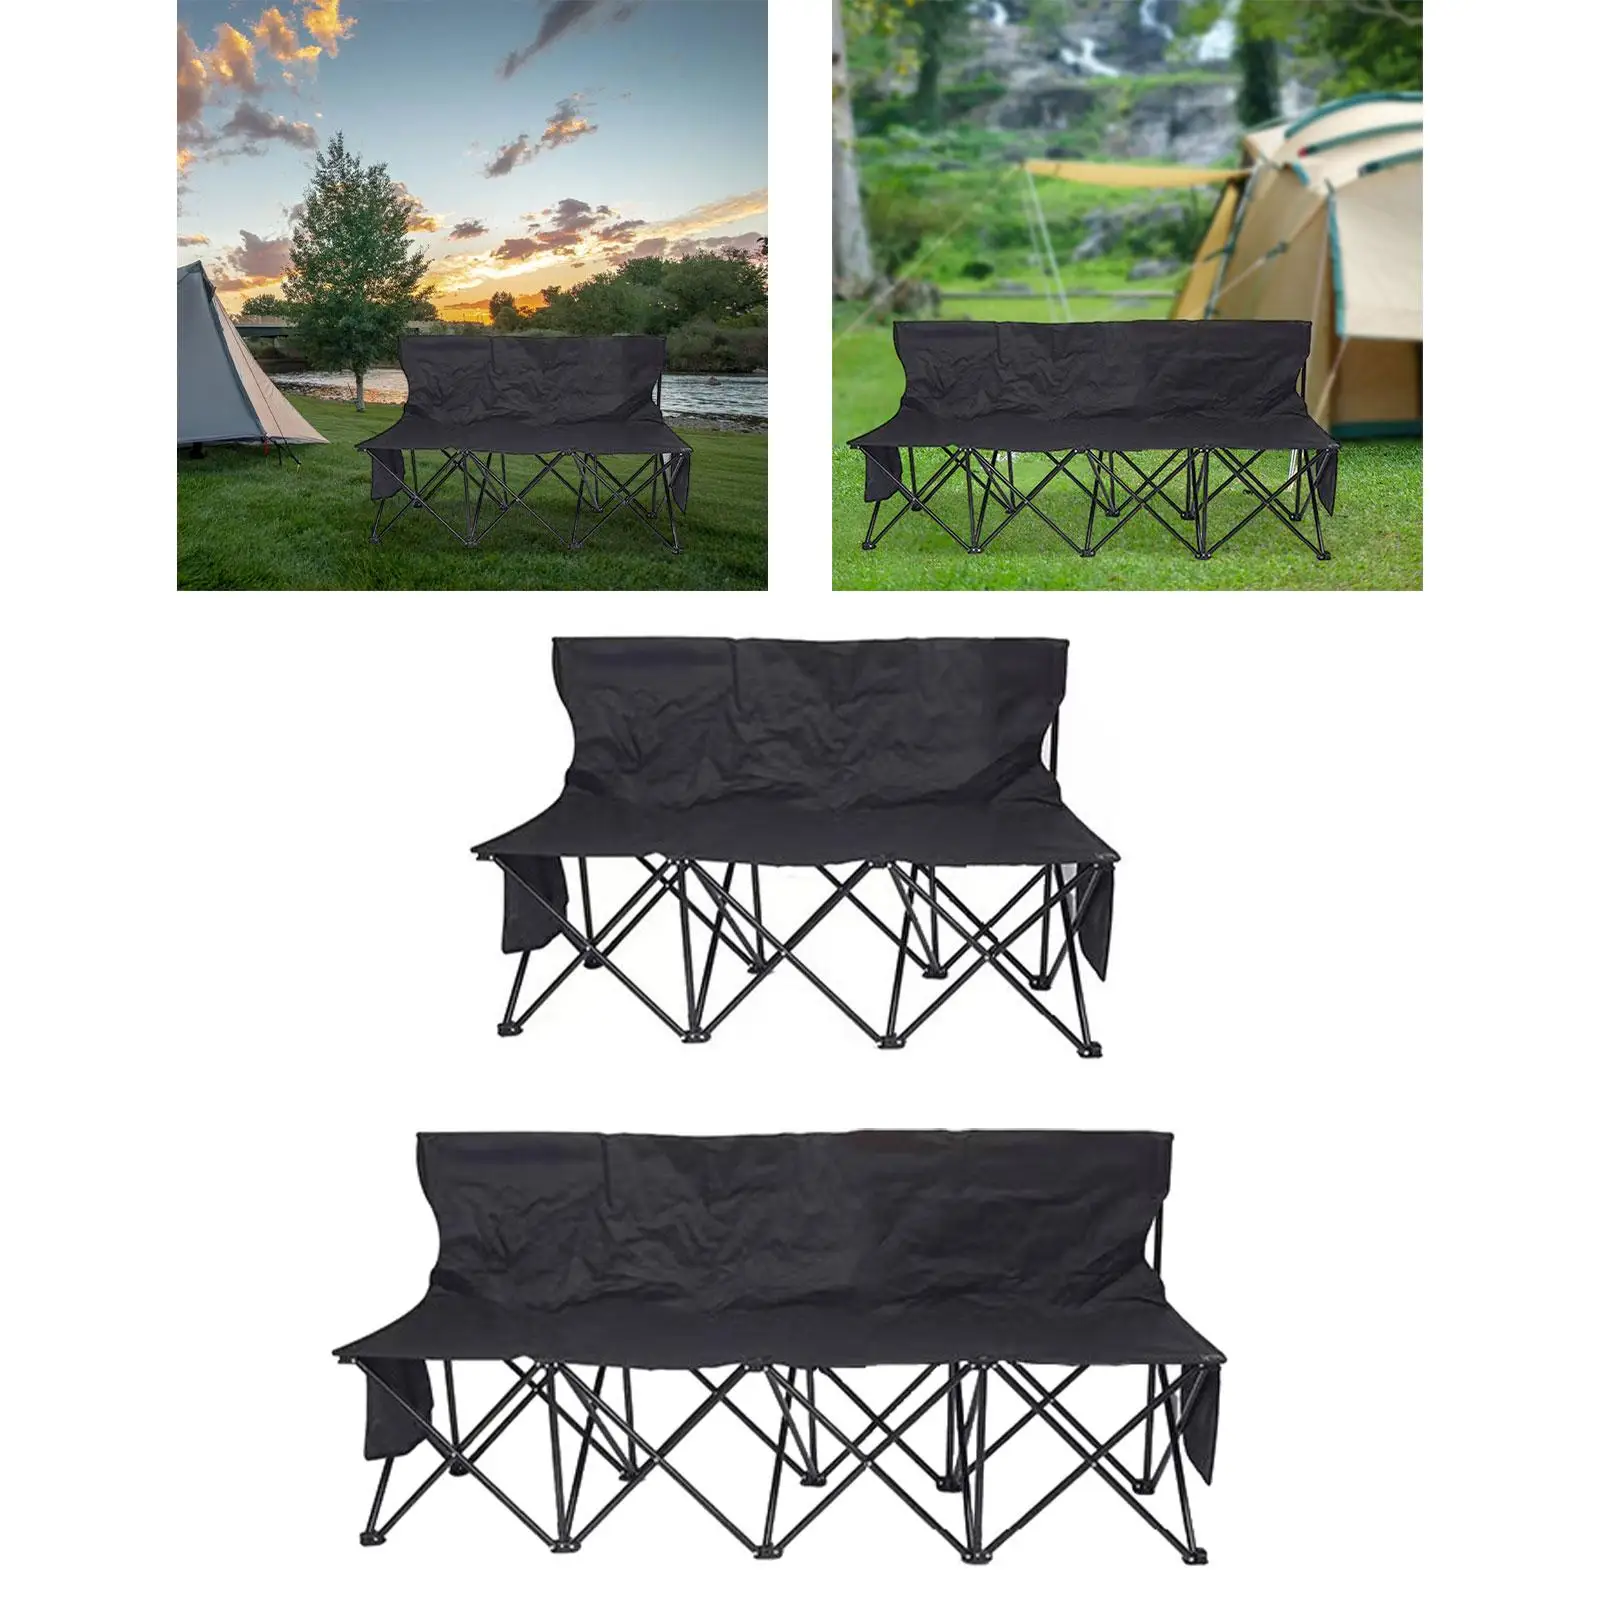 Folding Bench Chair for Adults Multi Person Portable Sideline Bench Foldable for Lawn Events Backyard Soccer Football Camping